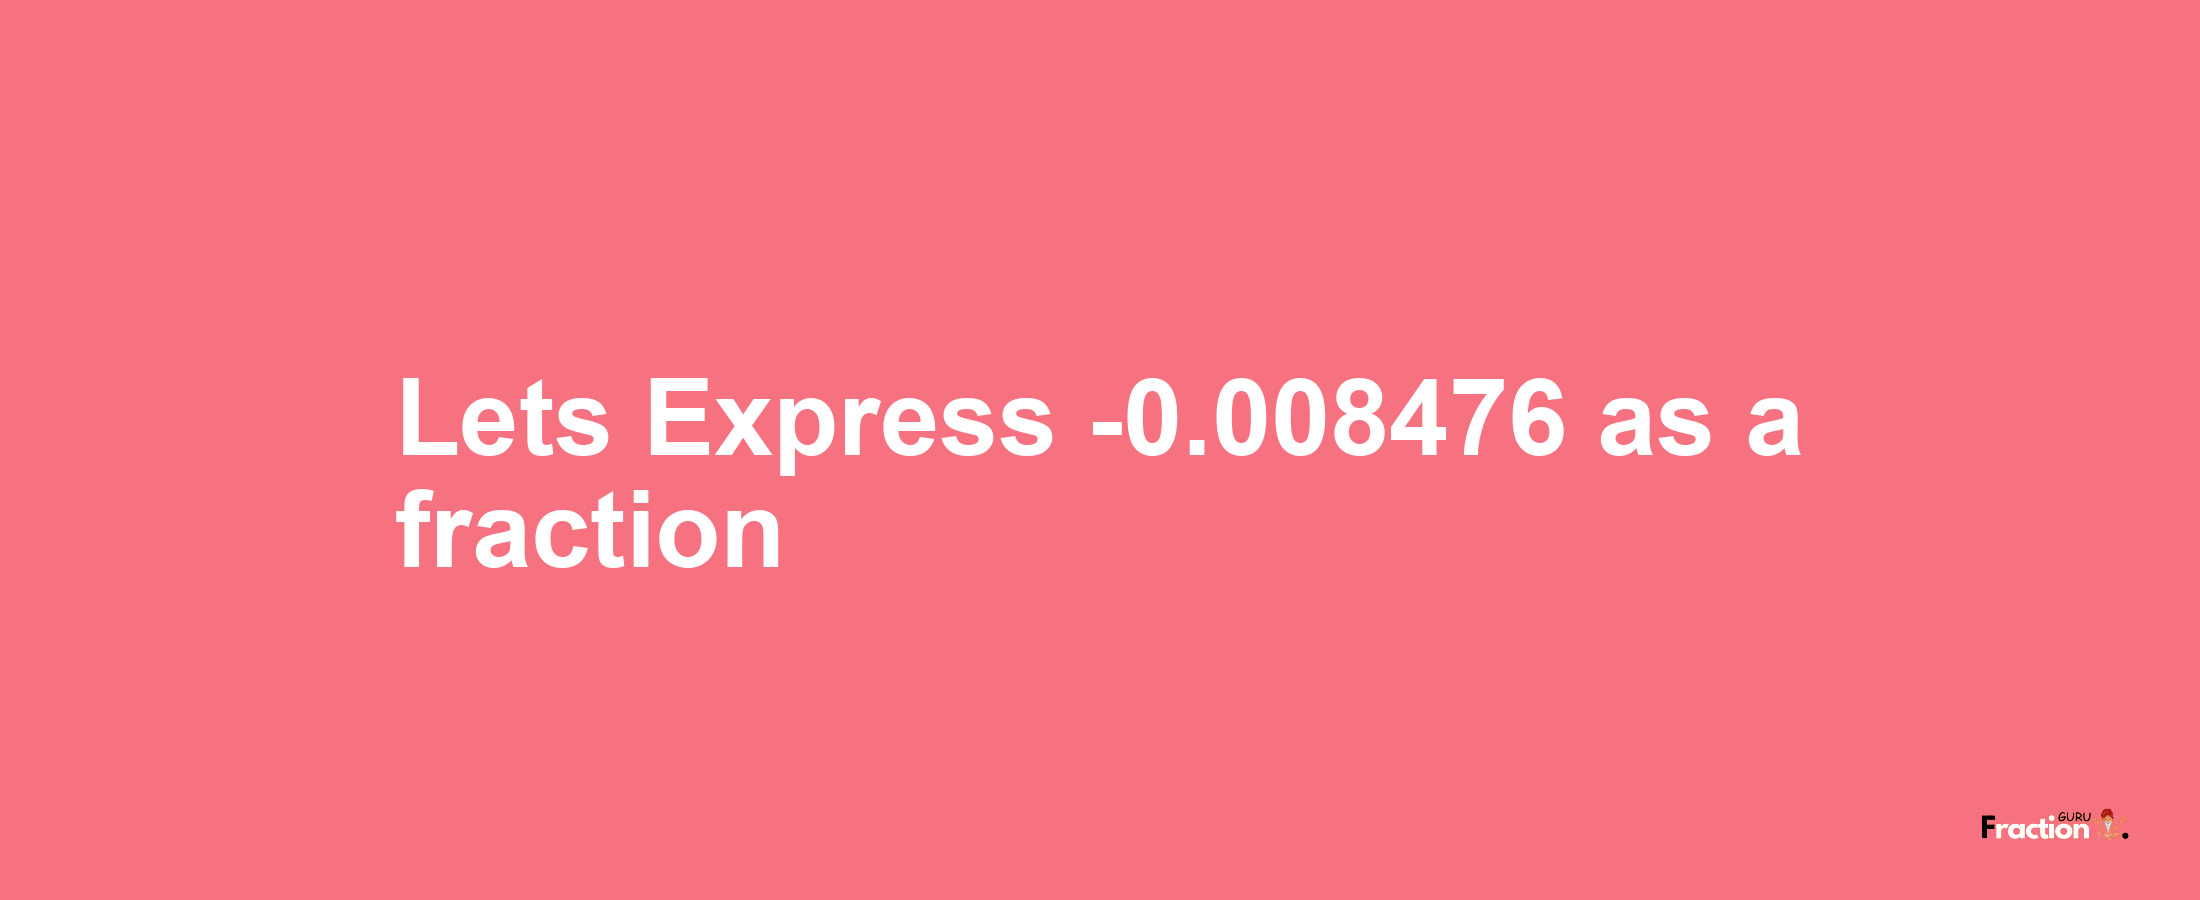 Lets Express -0.008476 as afraction